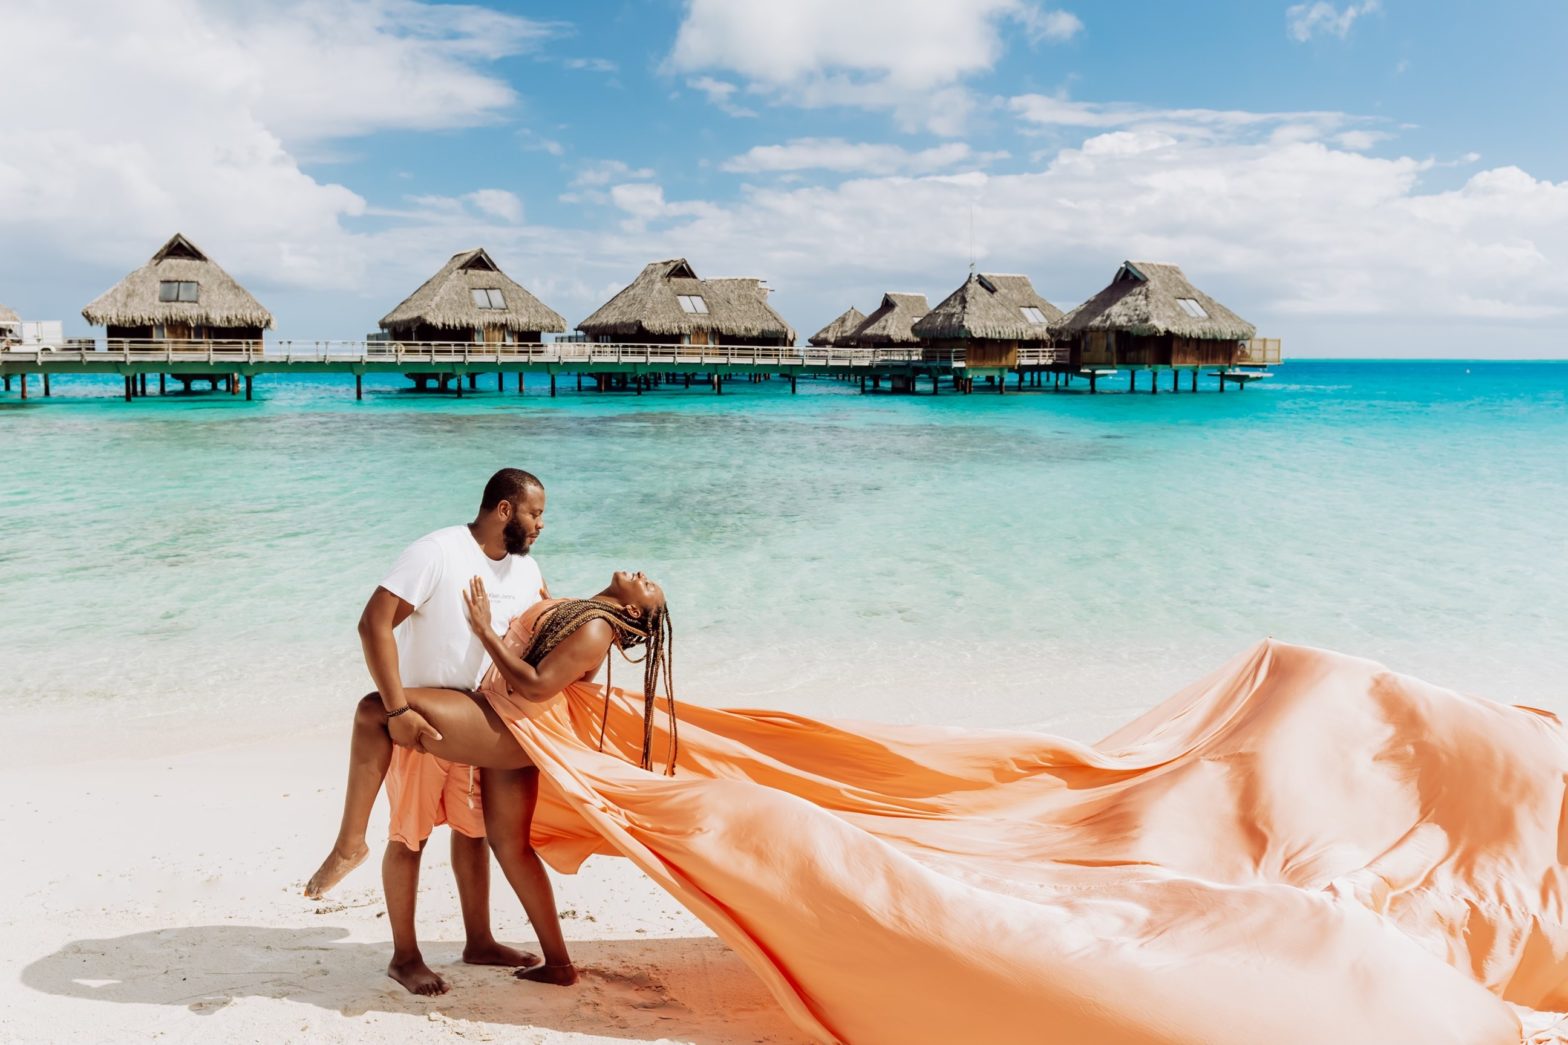 Why We Splurged: Inside Our $18,500 Dream Vacation To French Polynesia